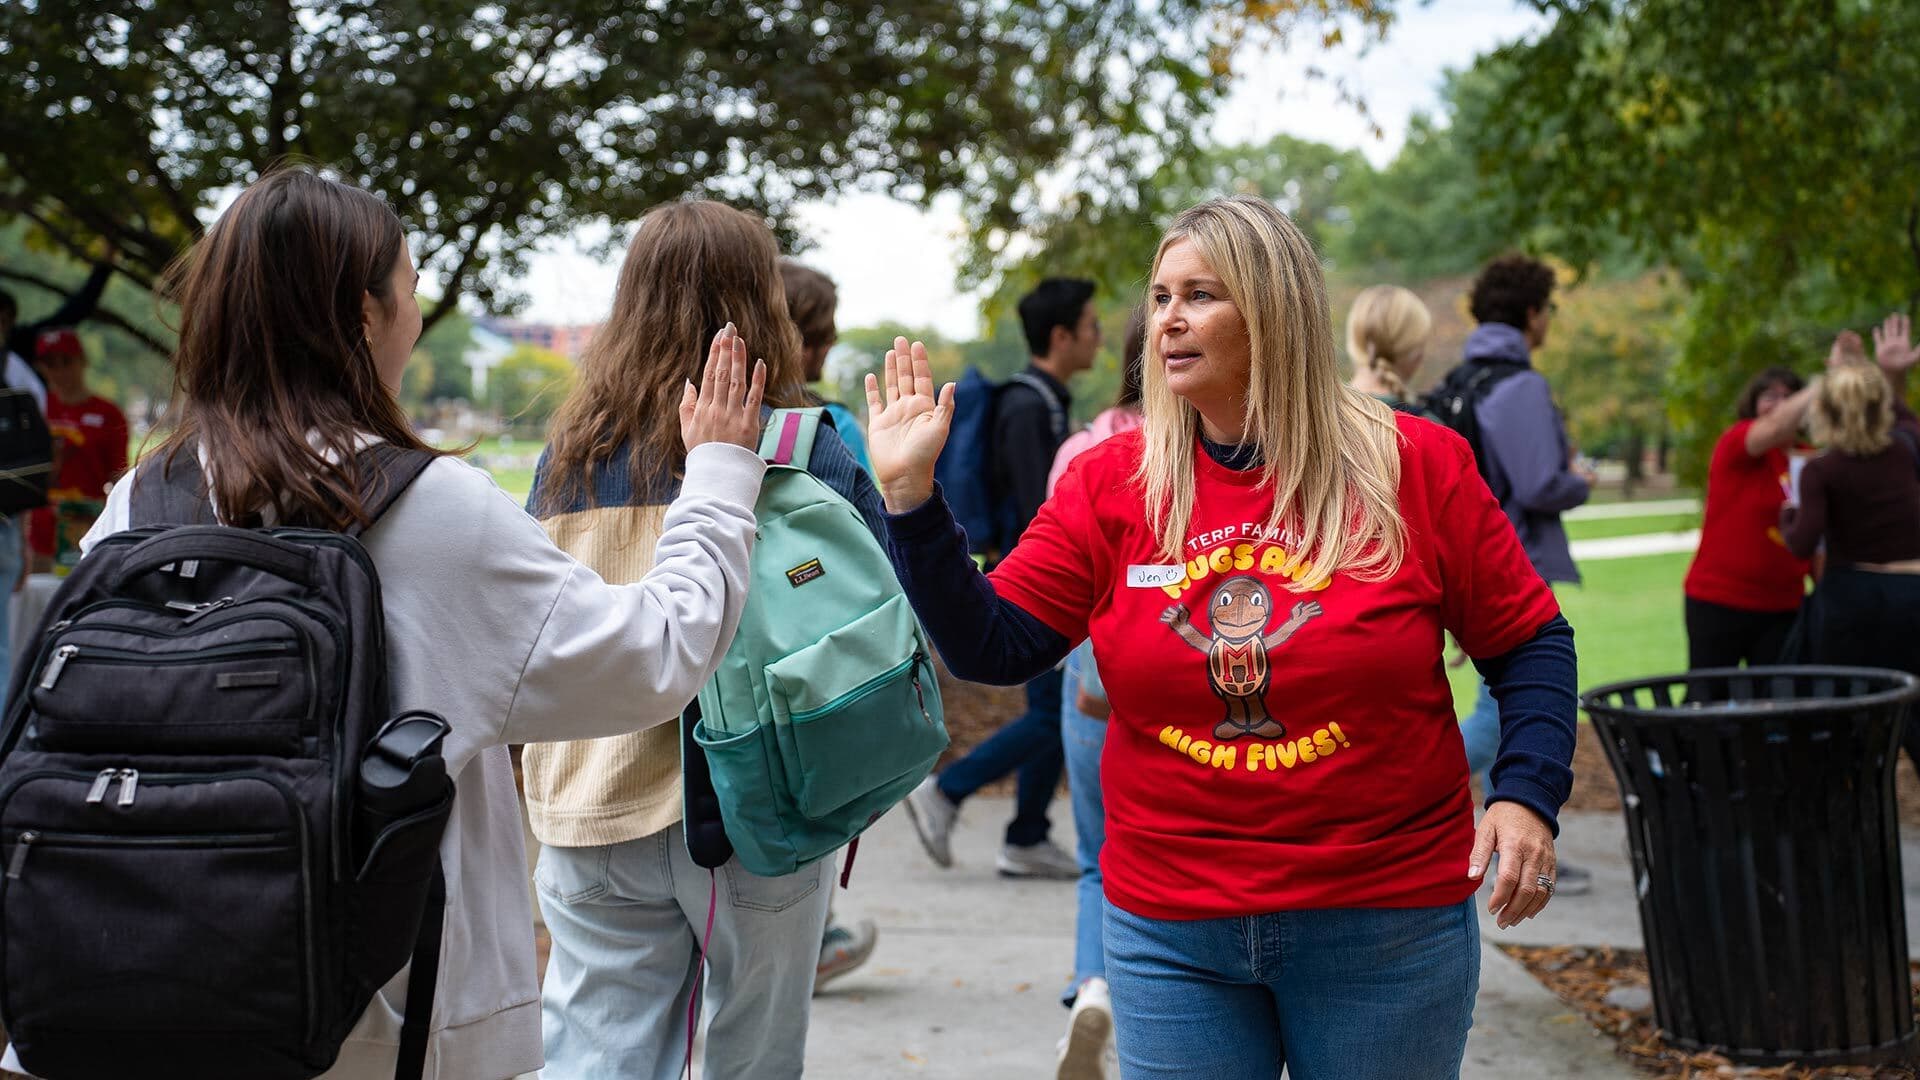 A mom offers a high five to passing students